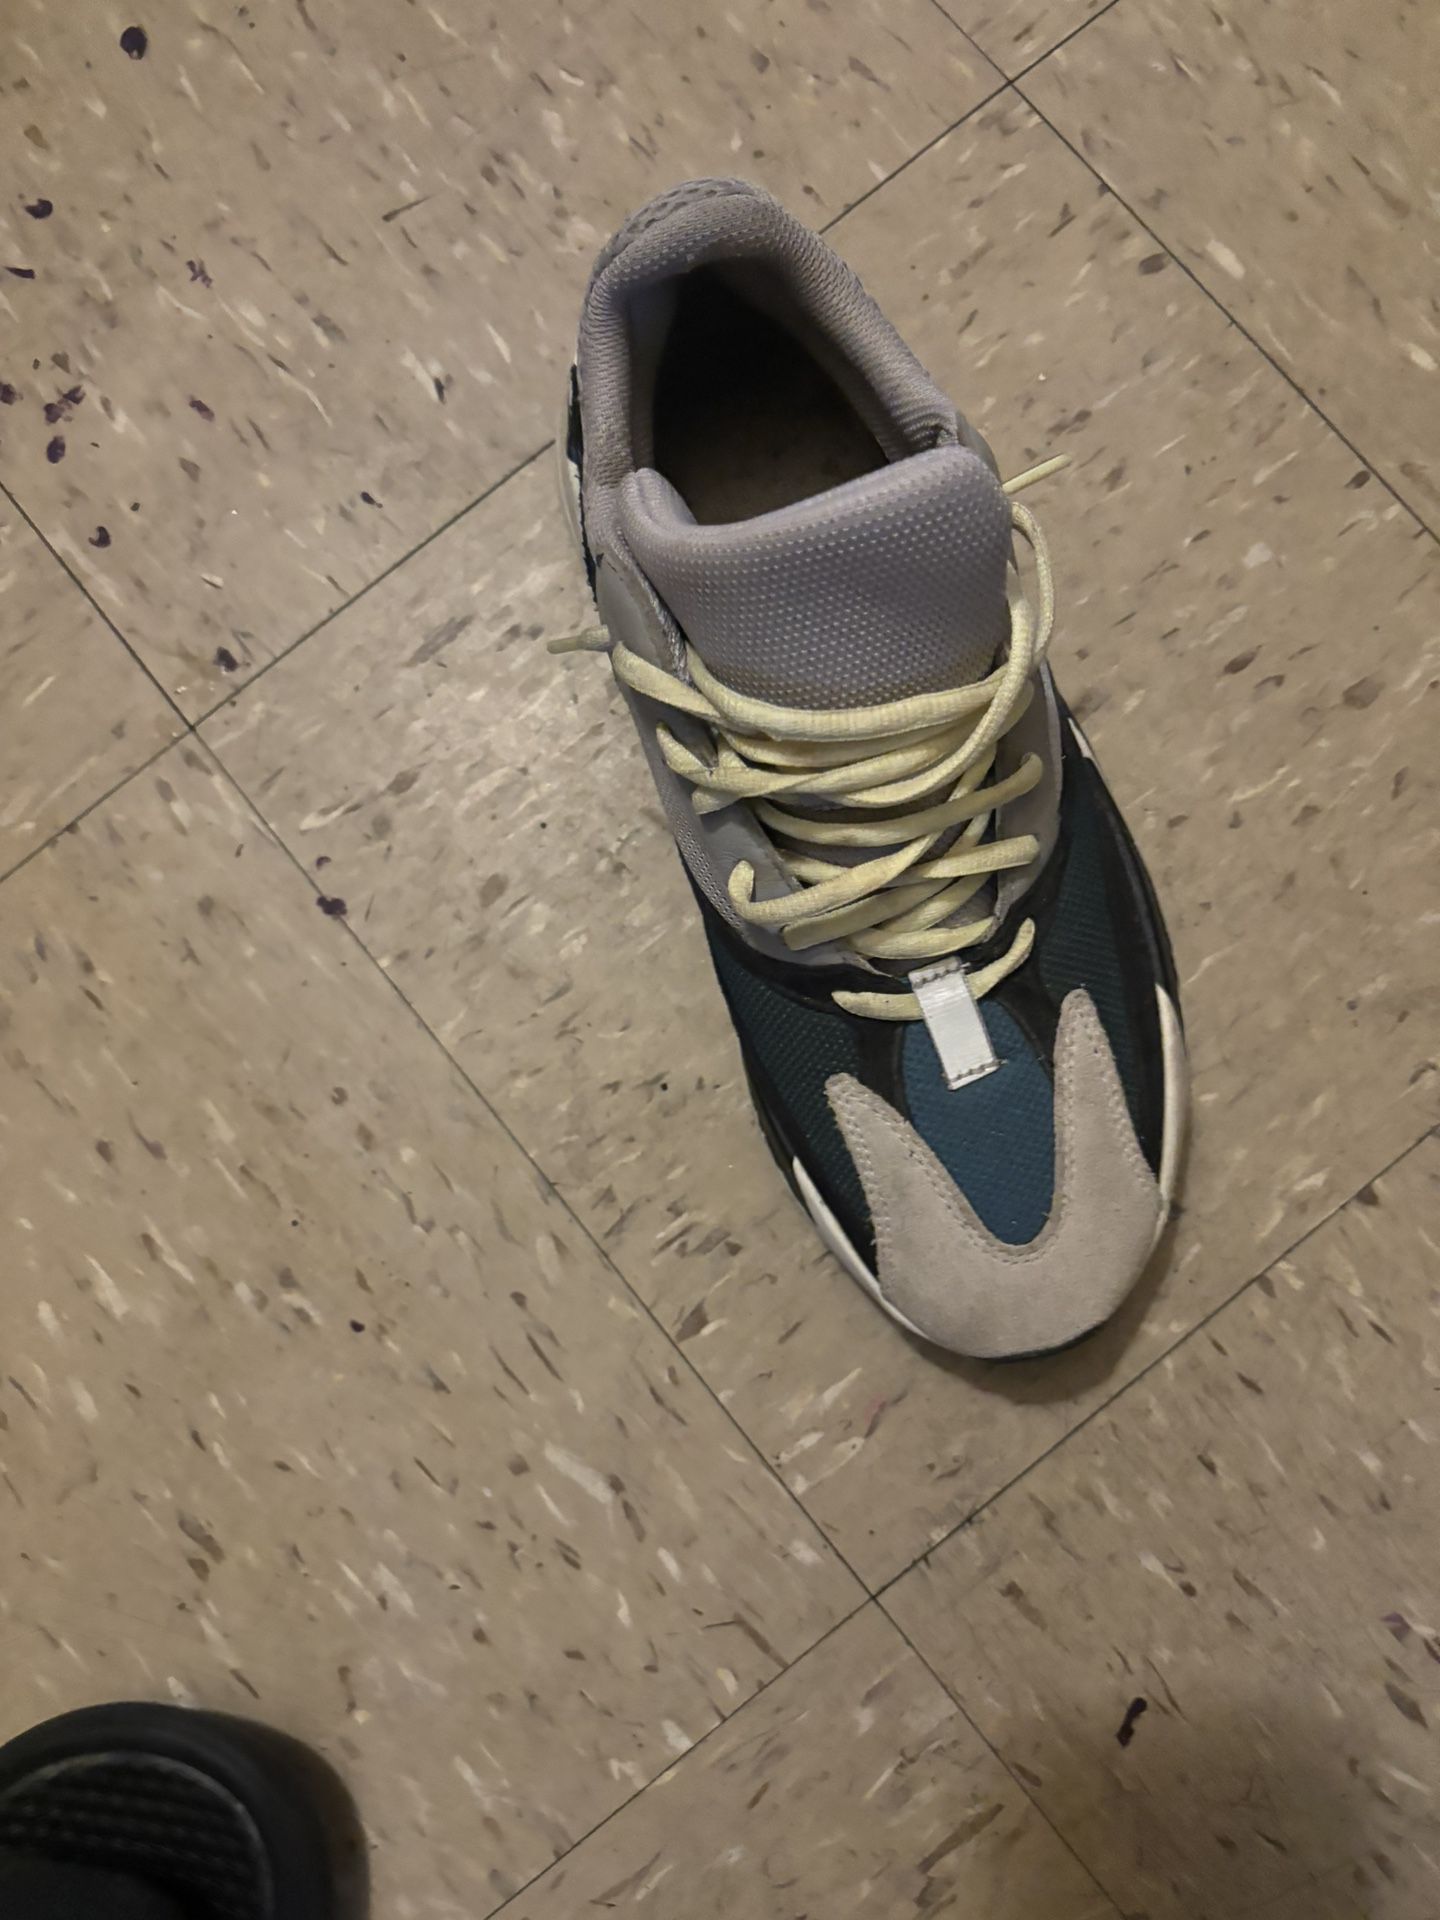 Yeezy 700 Size 9 8/10 Conditions 